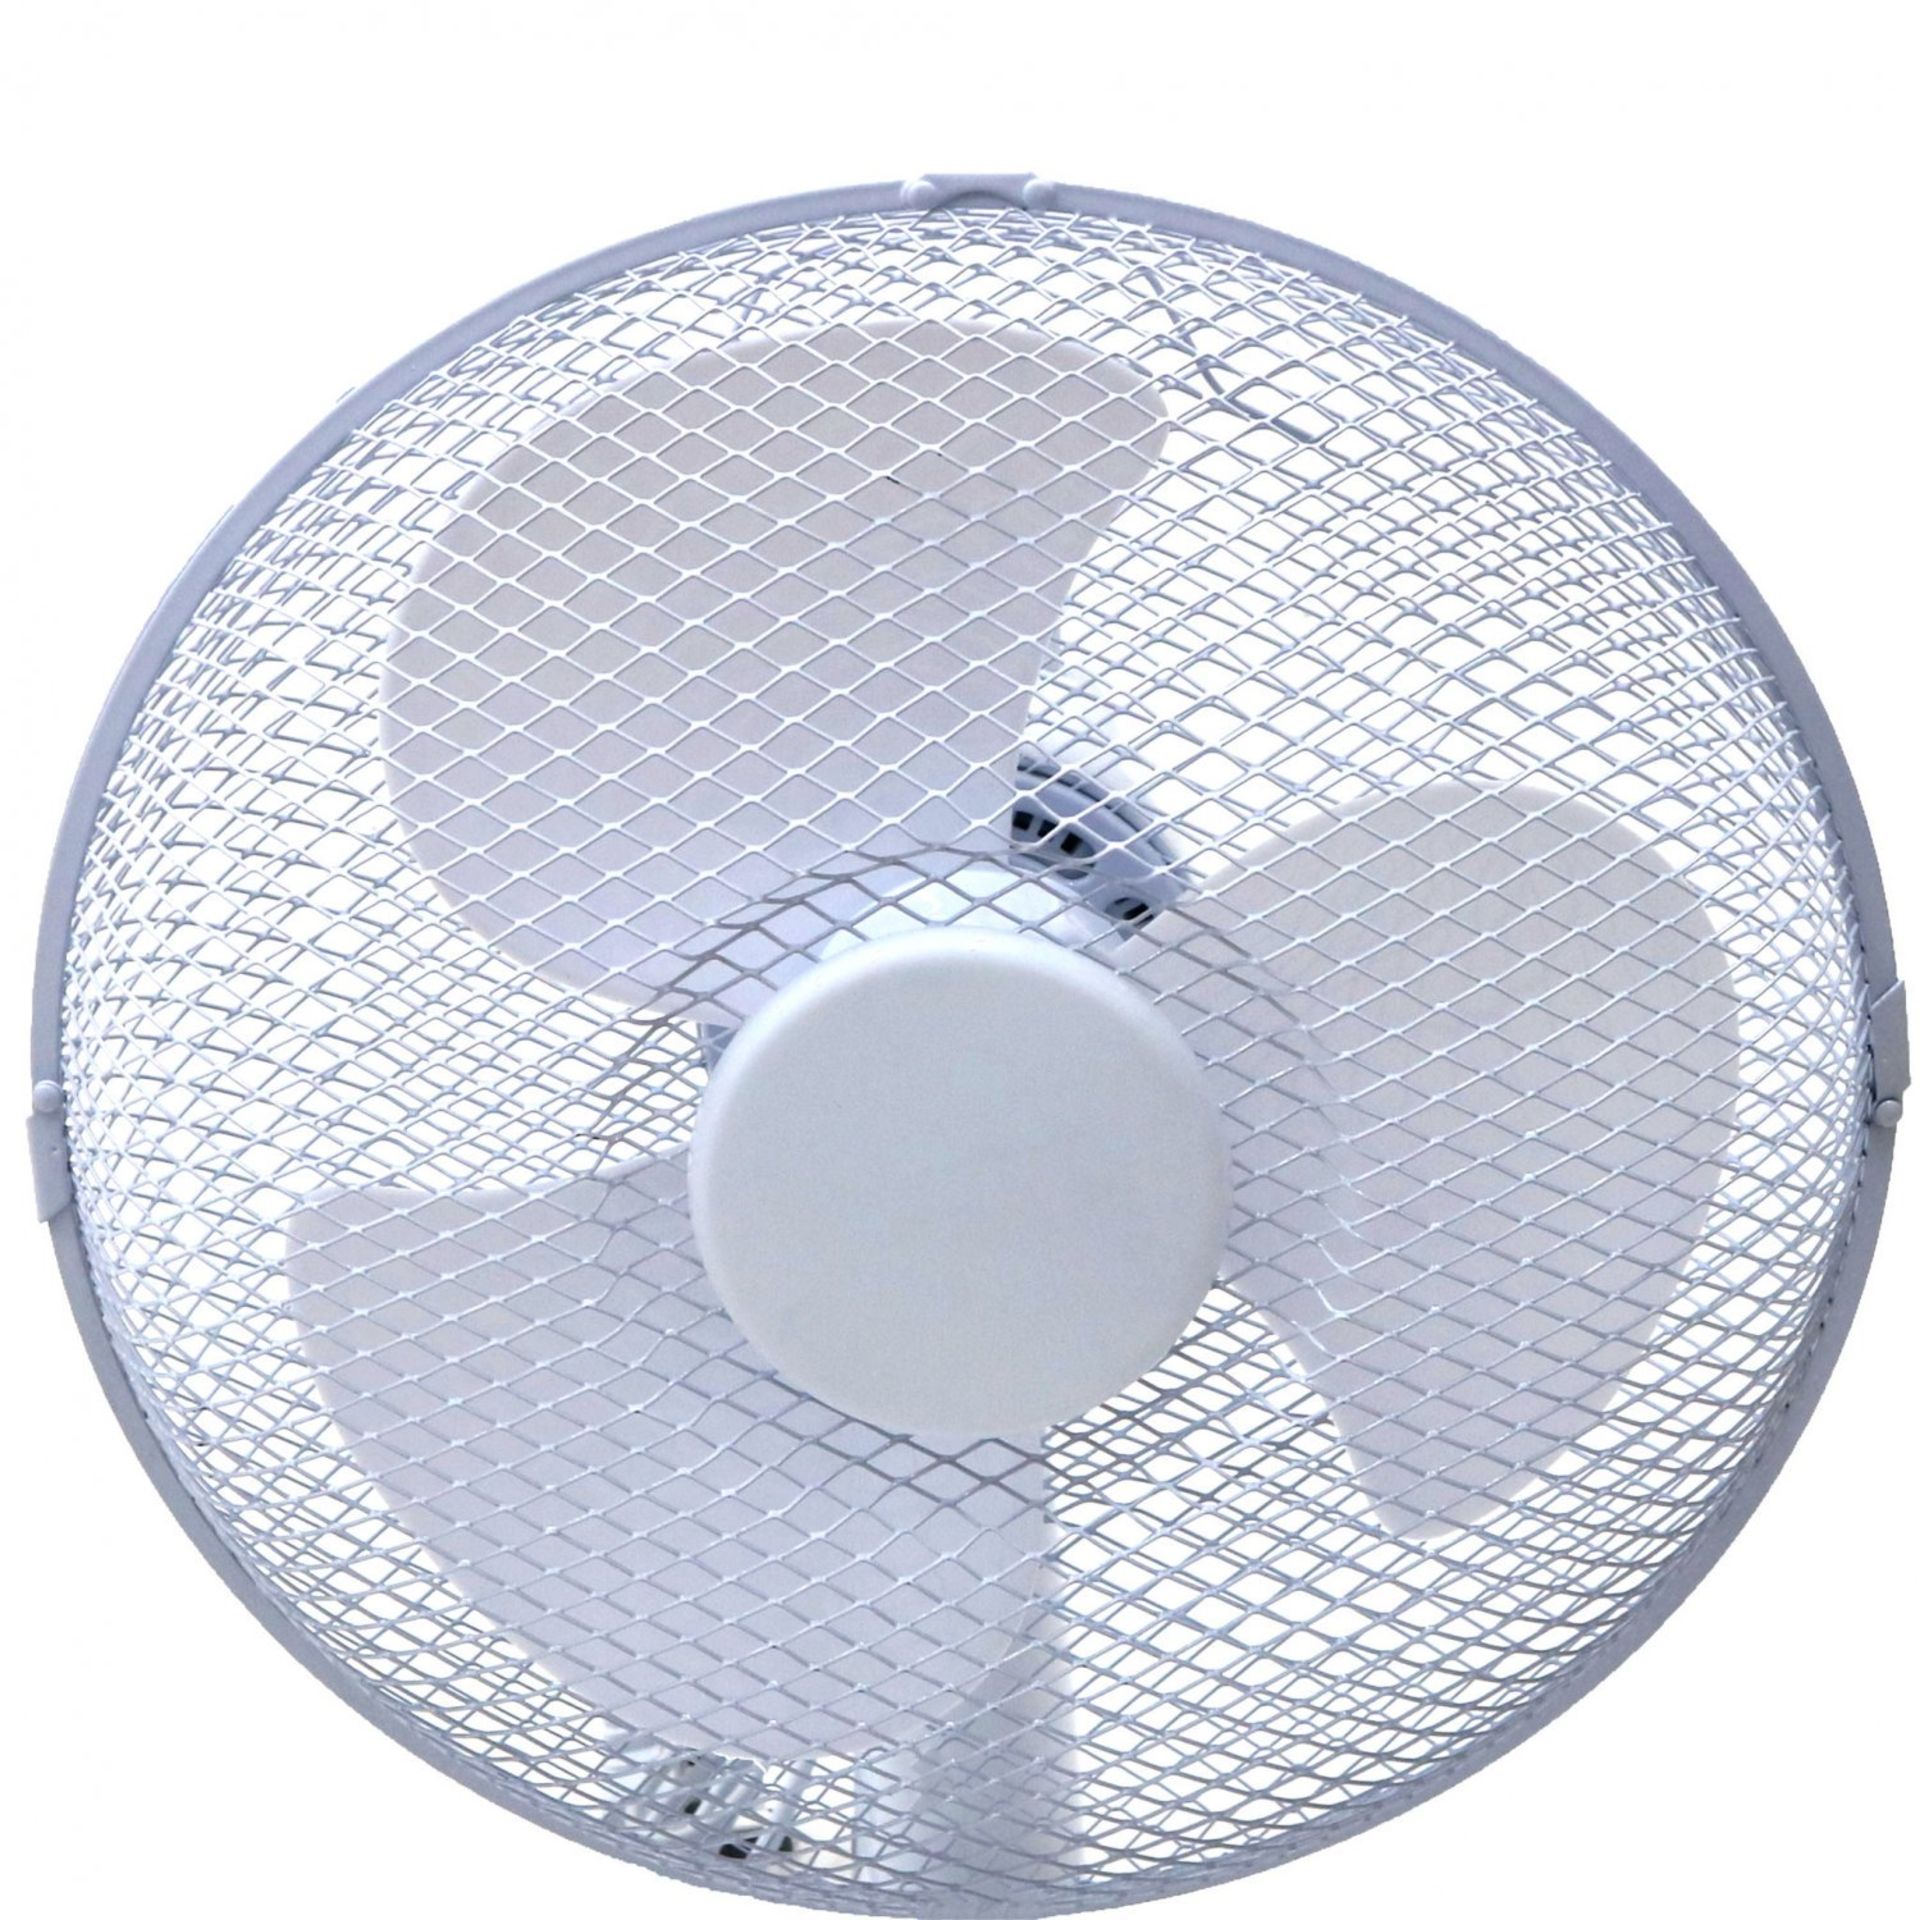 (LF262) 12" Oscillating White Desk Top Fan 3 Speed Push Button Speed Control Cable Length App... - Image 3 of 3